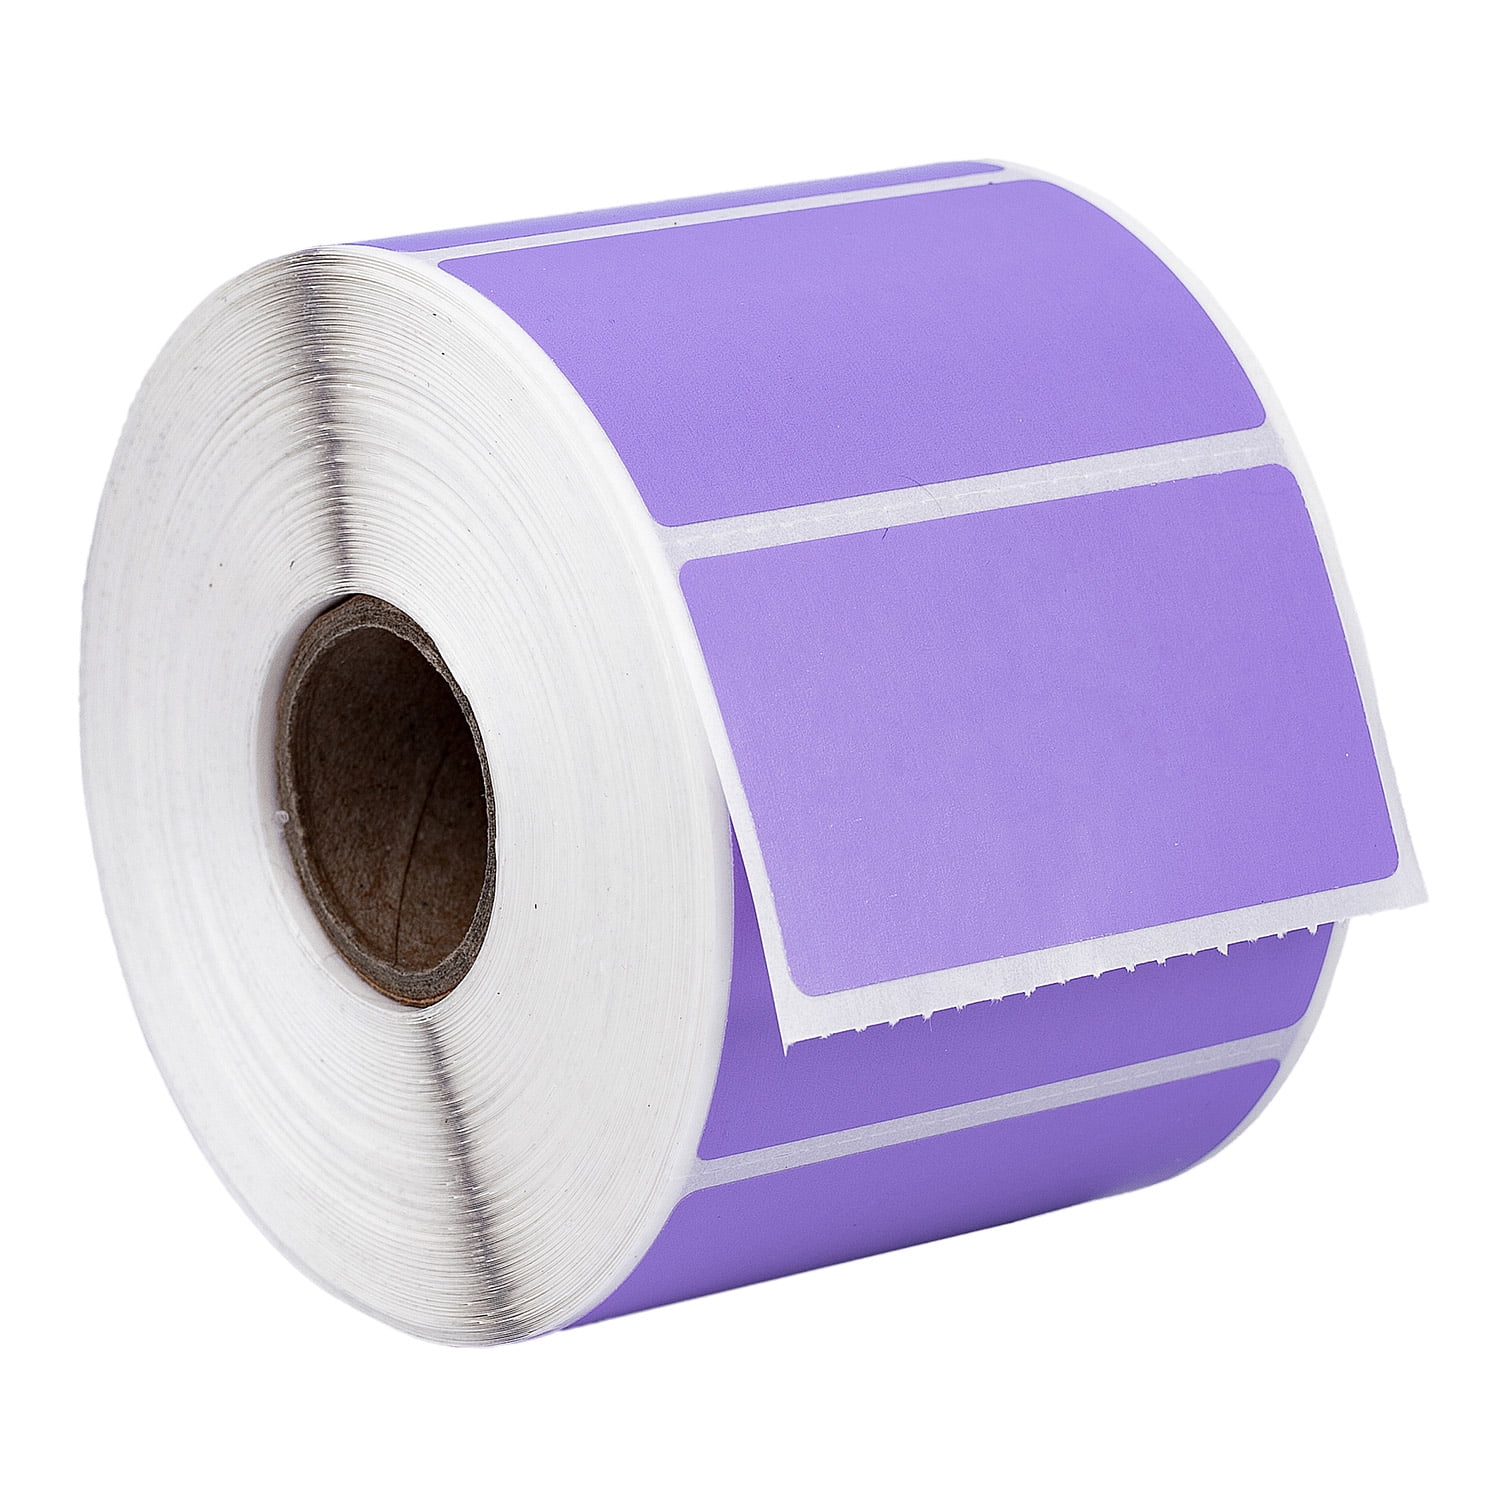 12 Rolls 2.25x1.25 Direct Thermal Shipping Label 1000/Roll for Zebra LP2824 2844 